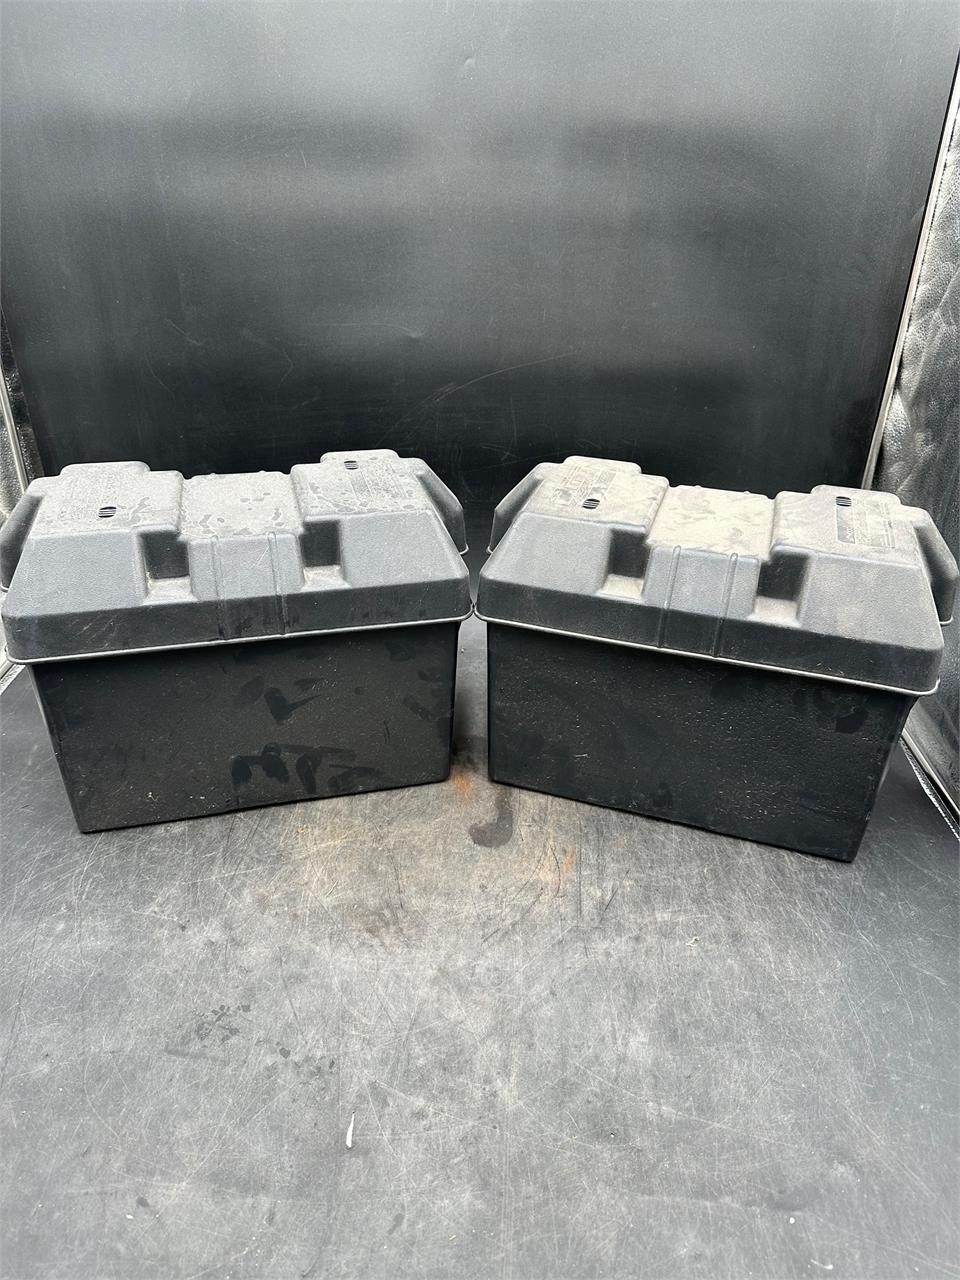 2 Battery Boxes